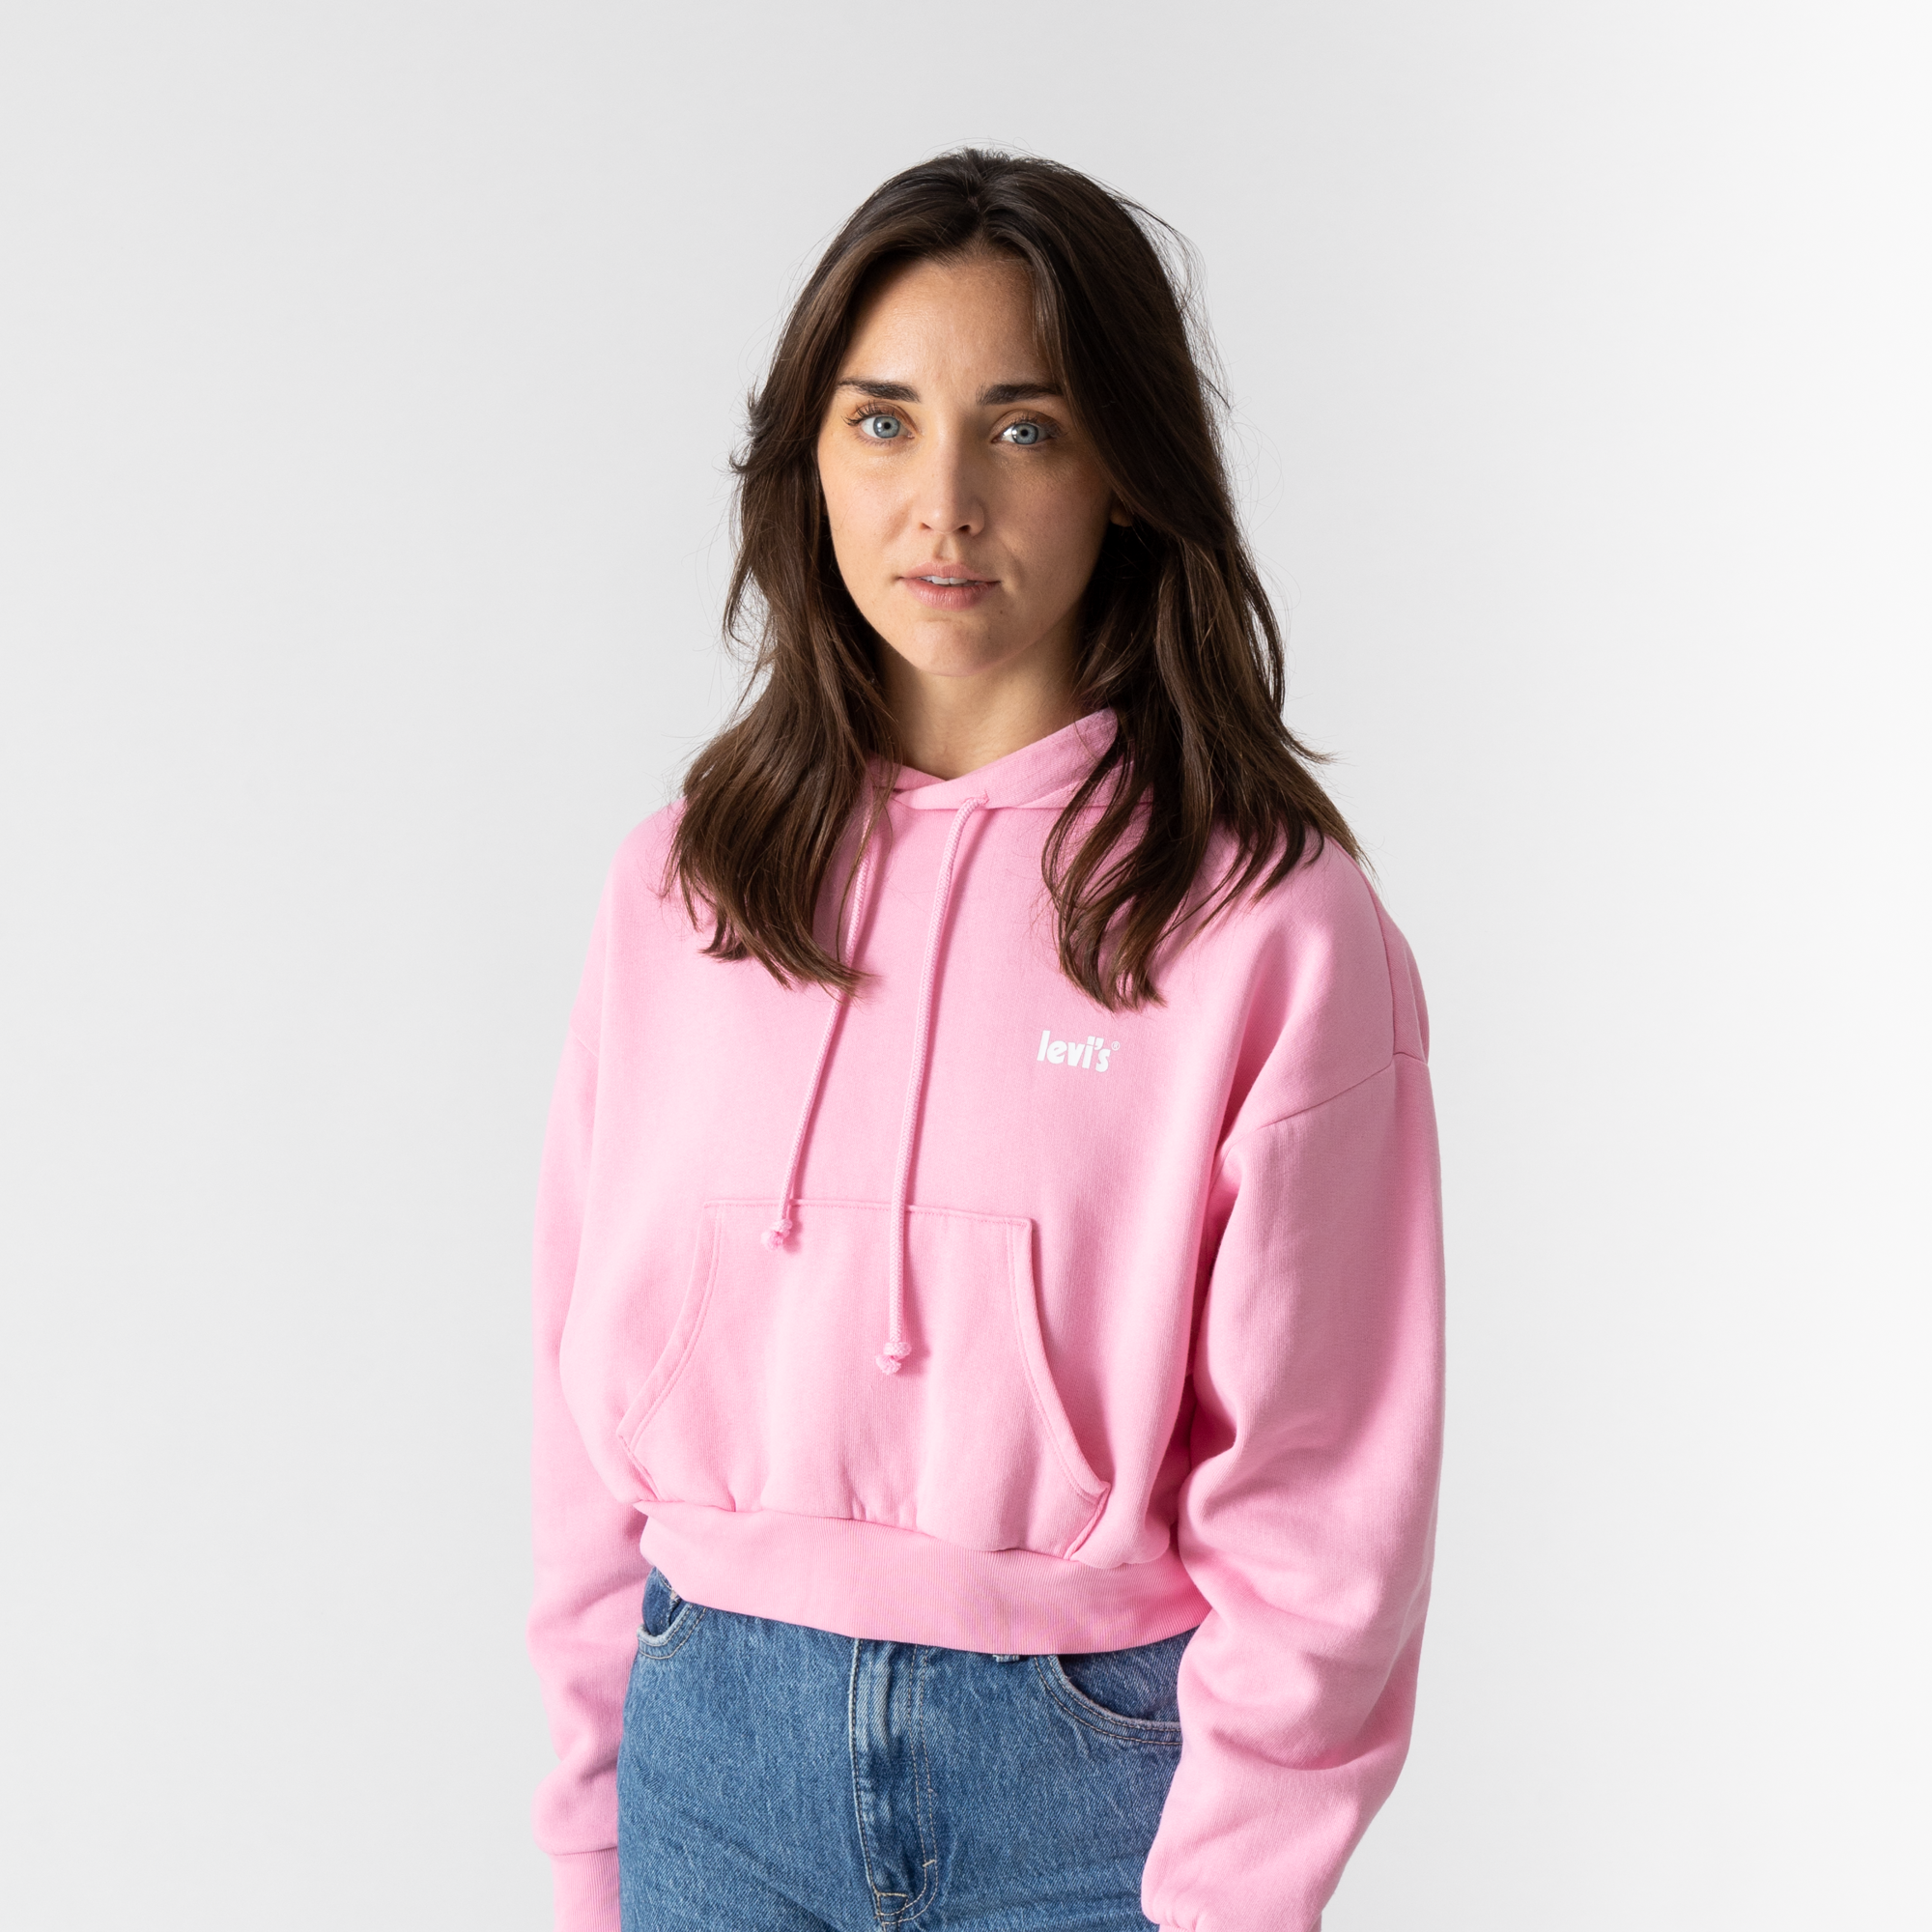 LEVIS HOODIE LAUNDRY DAY PINK 